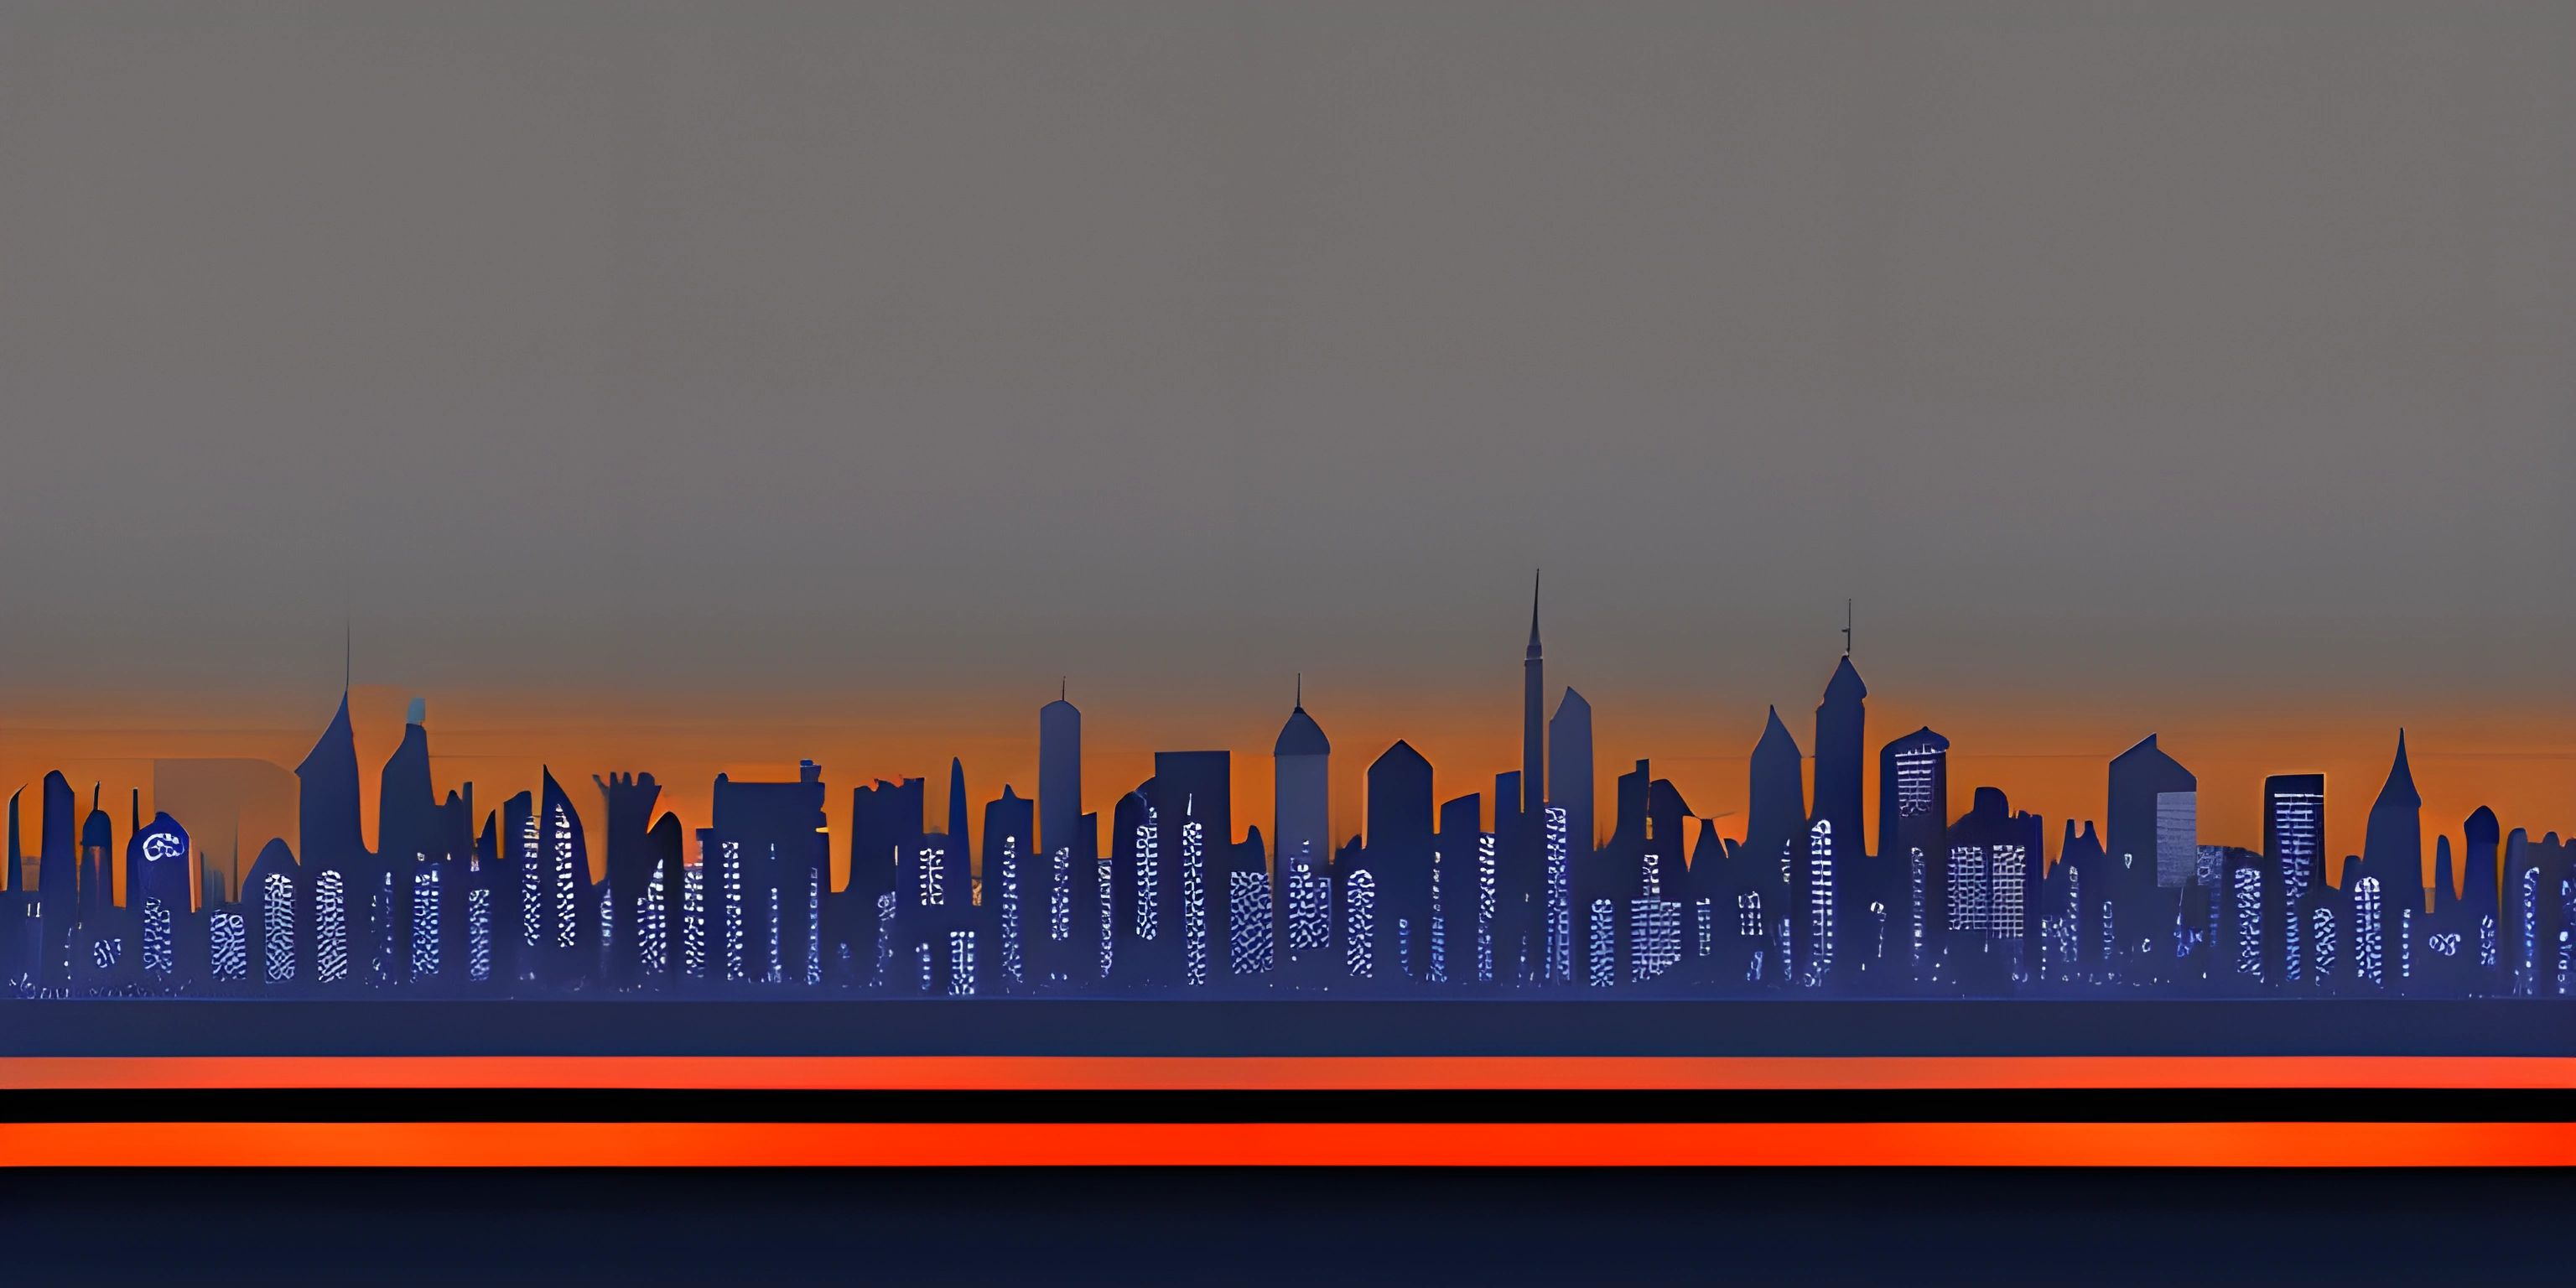 silhouette of skyline with multiple buildings lit up at sunset, on a city street, under an orange sky